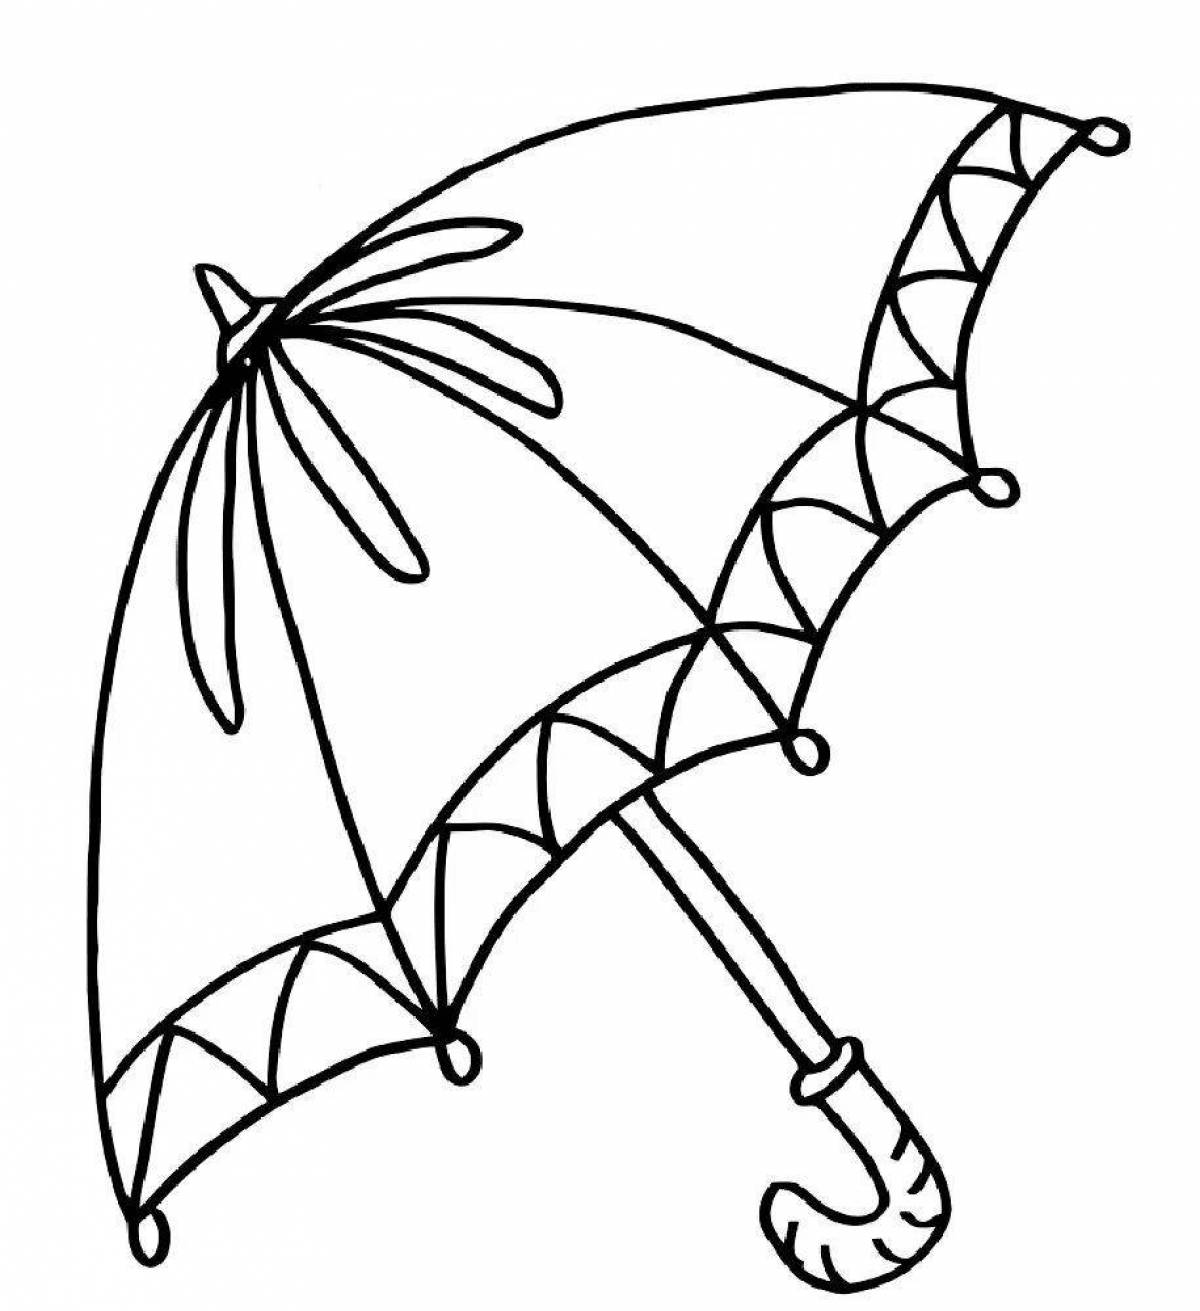 Color-frenzy umbrella coloring page for children 4-5 years old